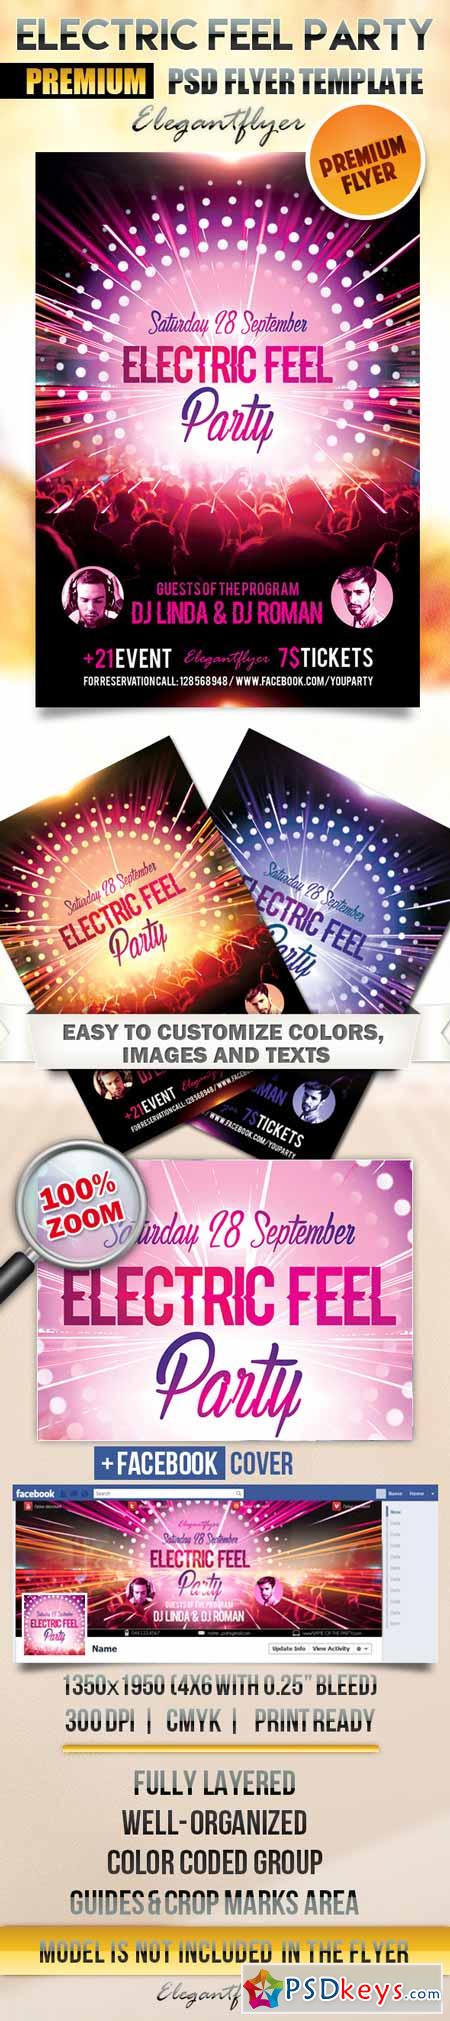 Electric Feel Party – Flyer PSD Template + Facebook Cover